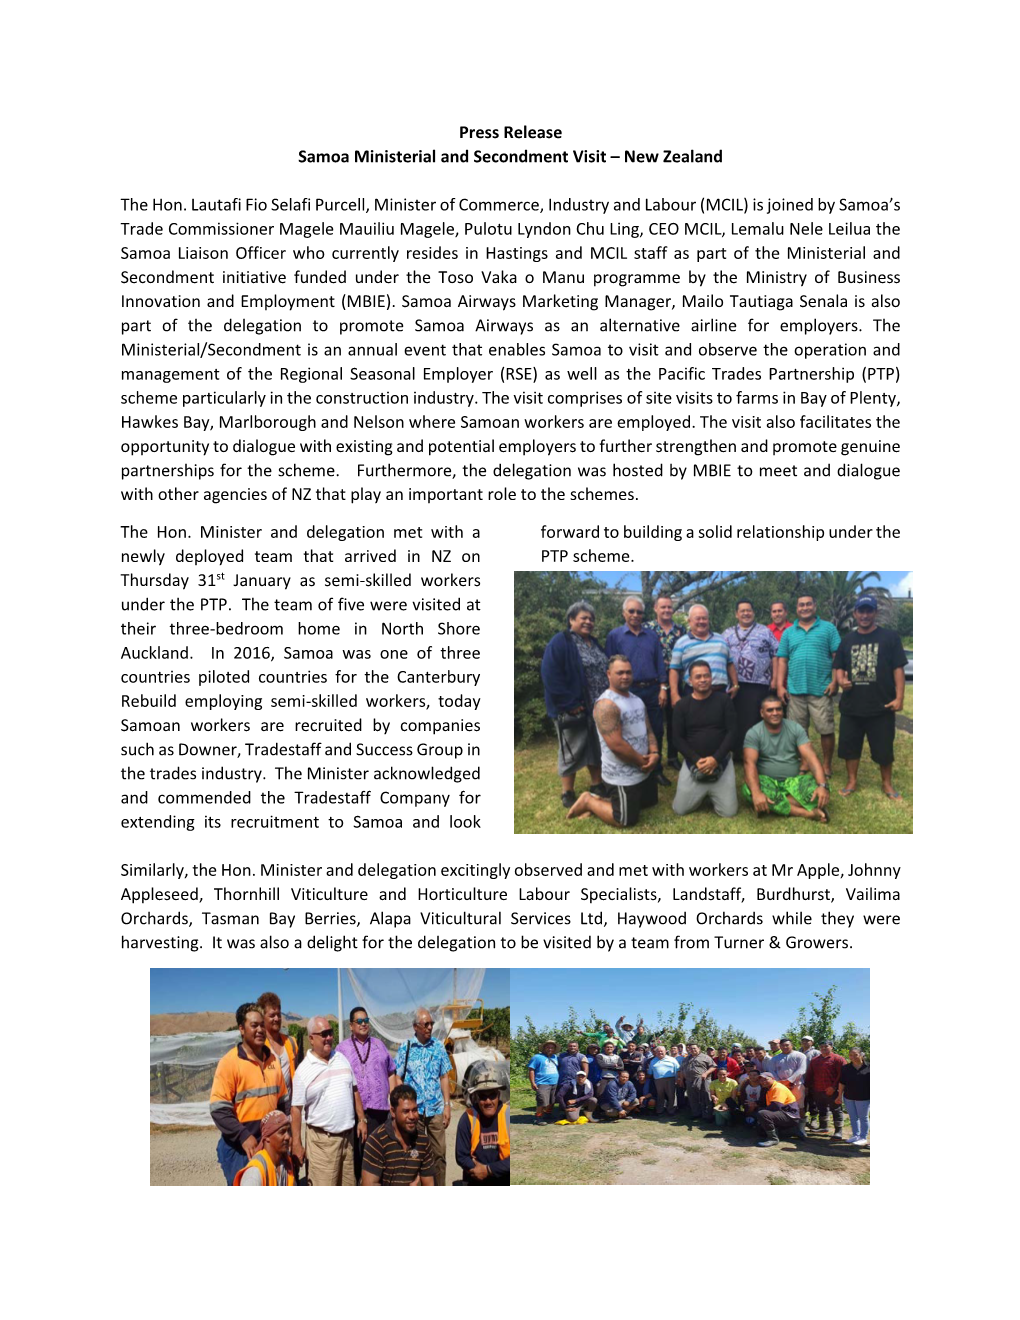 Press Release Samoa Ministerial and Secondment Visit – New Zealand